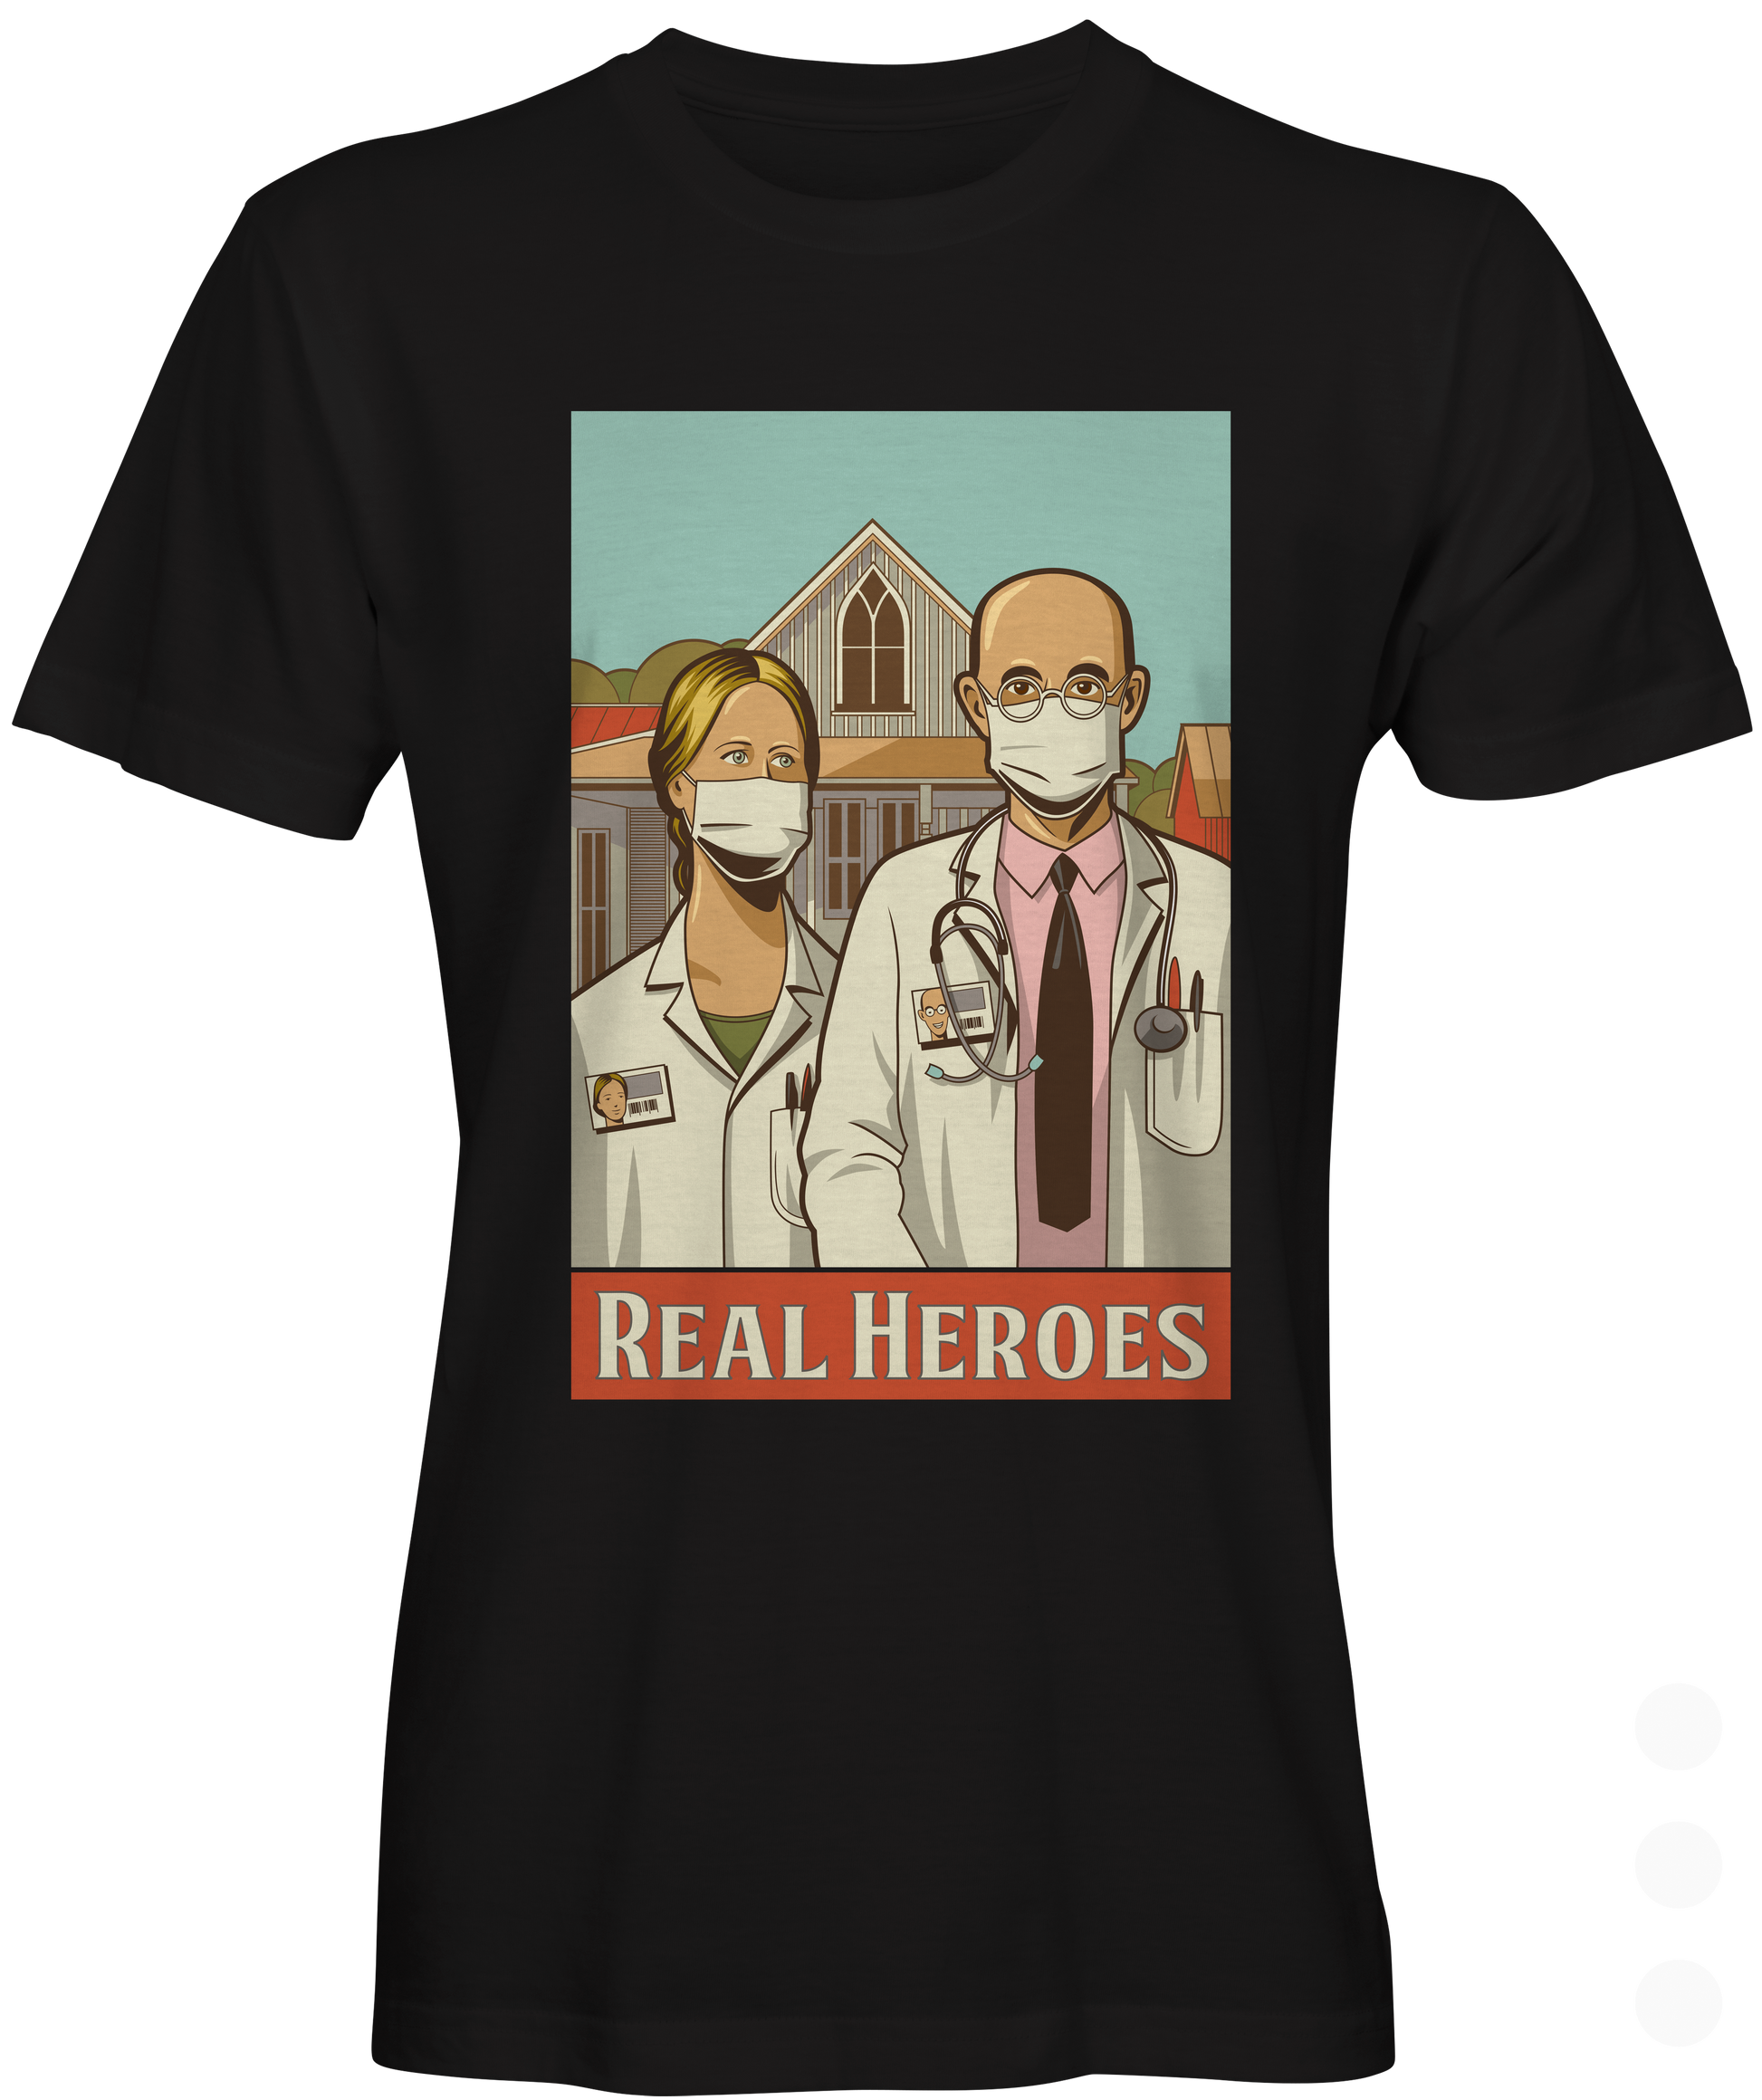 Real Heros Graphic tee